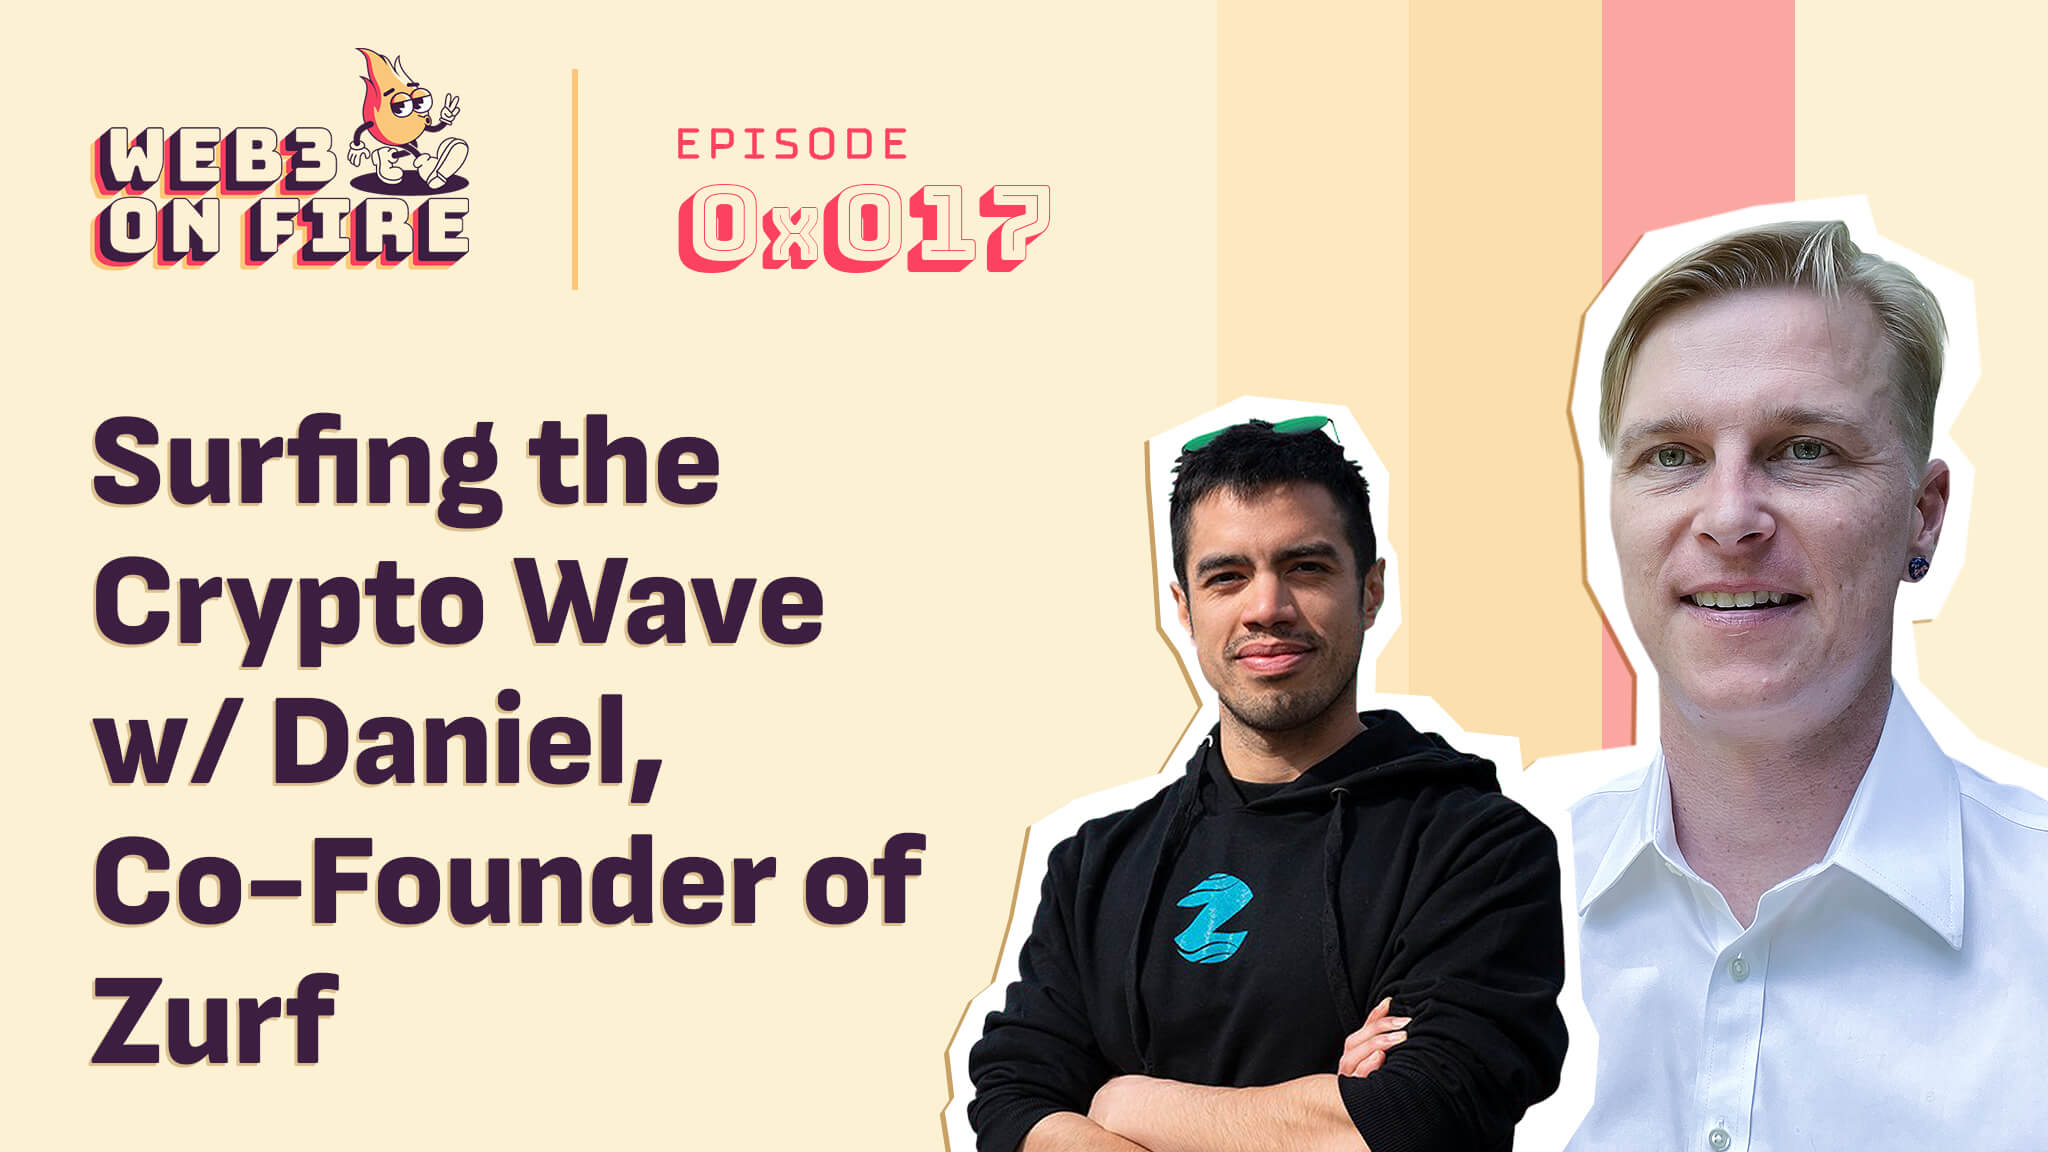 Surfing the Crypto Wave with Daniel, Co-Founder of Zurf